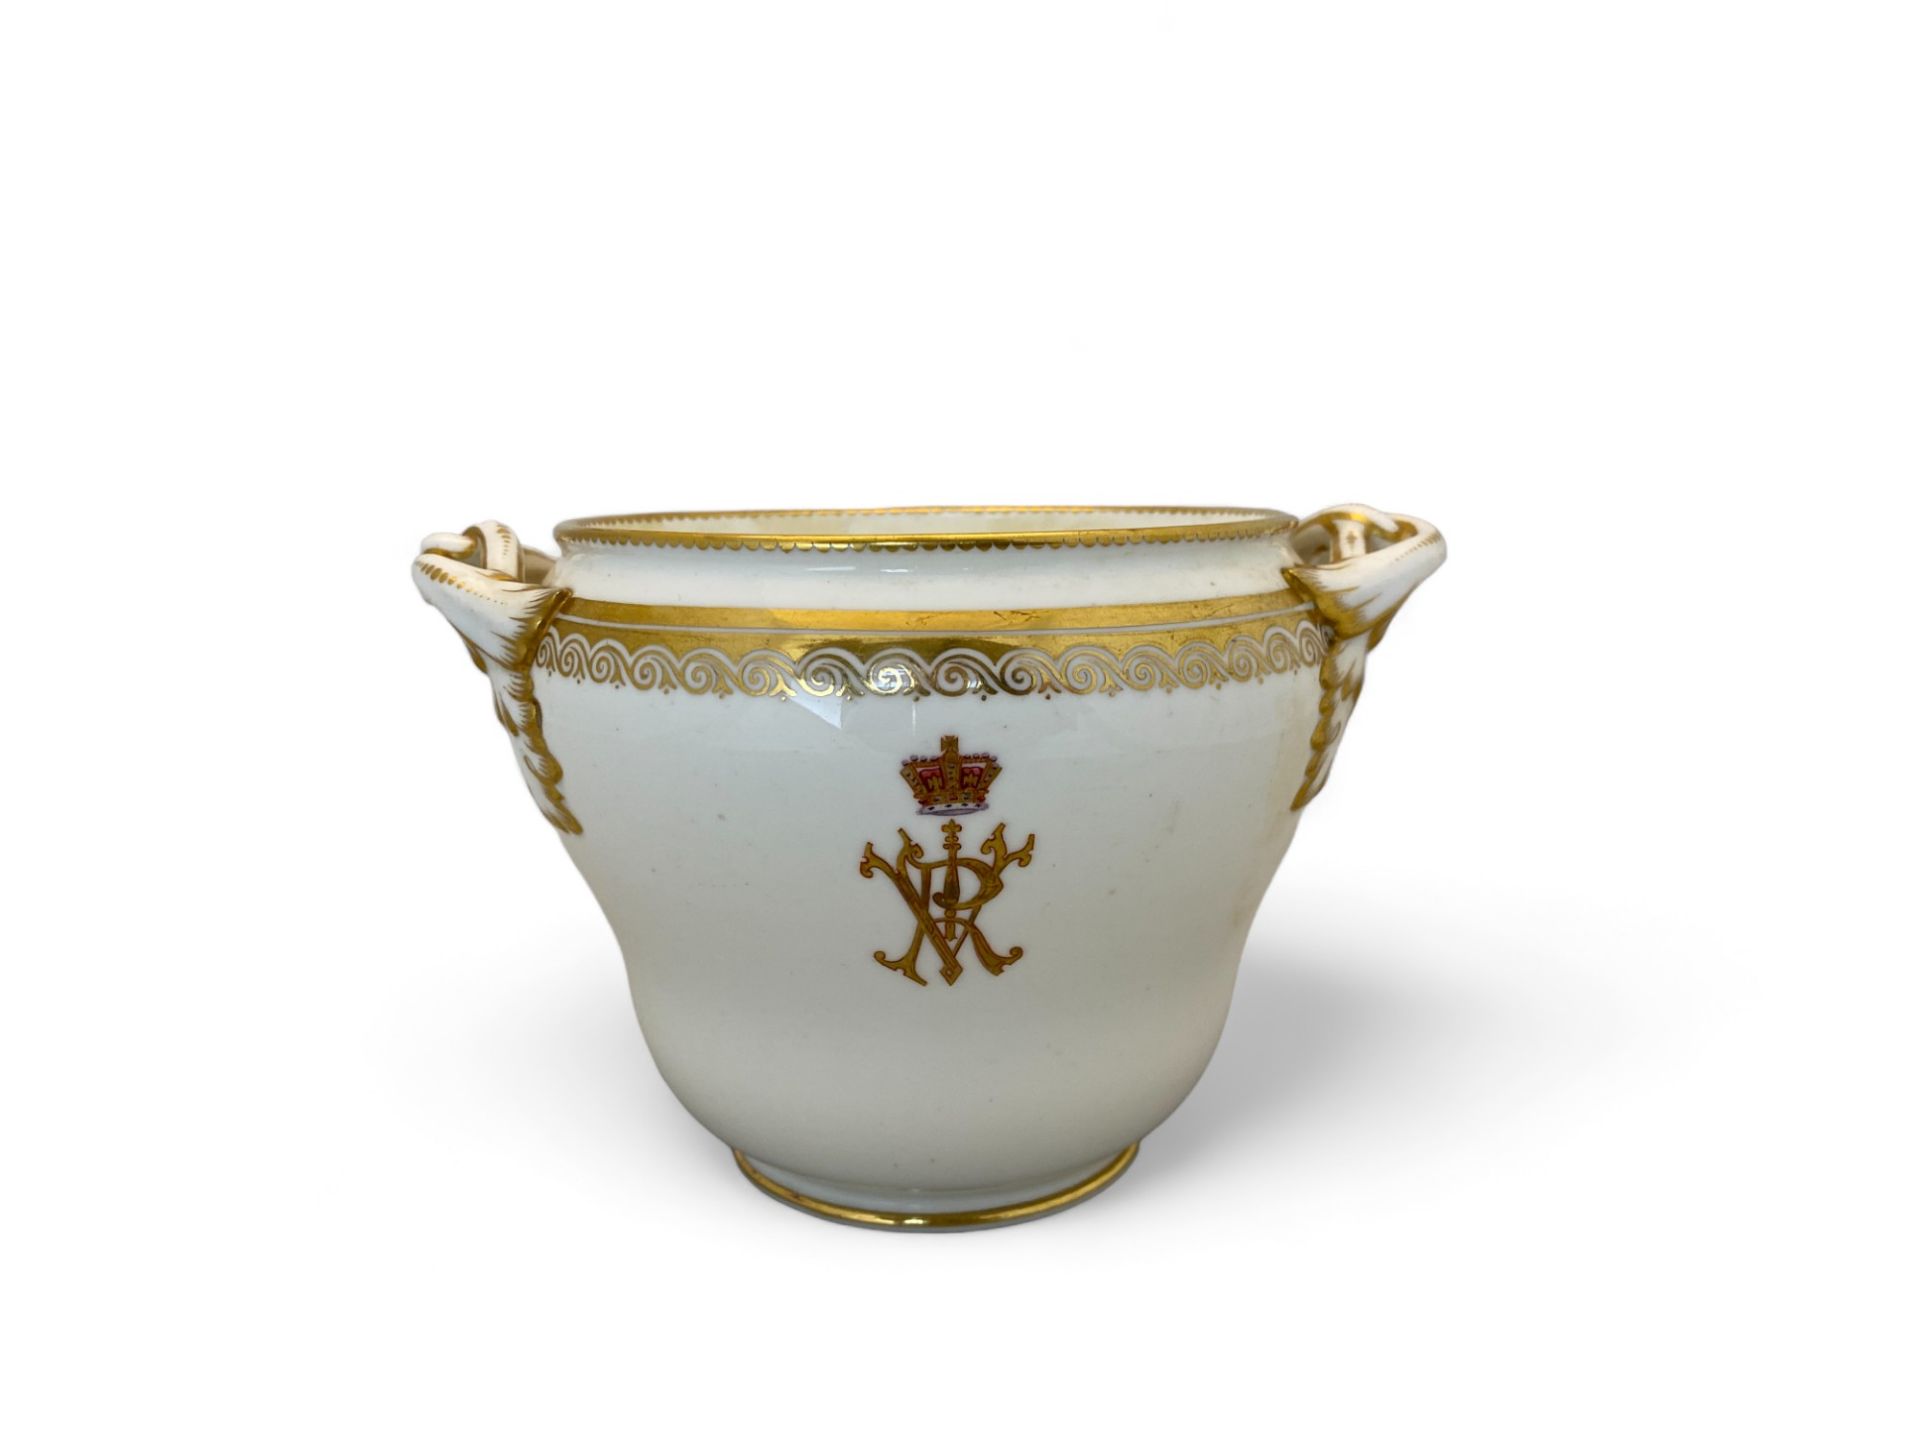 Of Royal Interest: A Mortlock China of Regent St white porcelain and gilt sugar bowl made for Queen